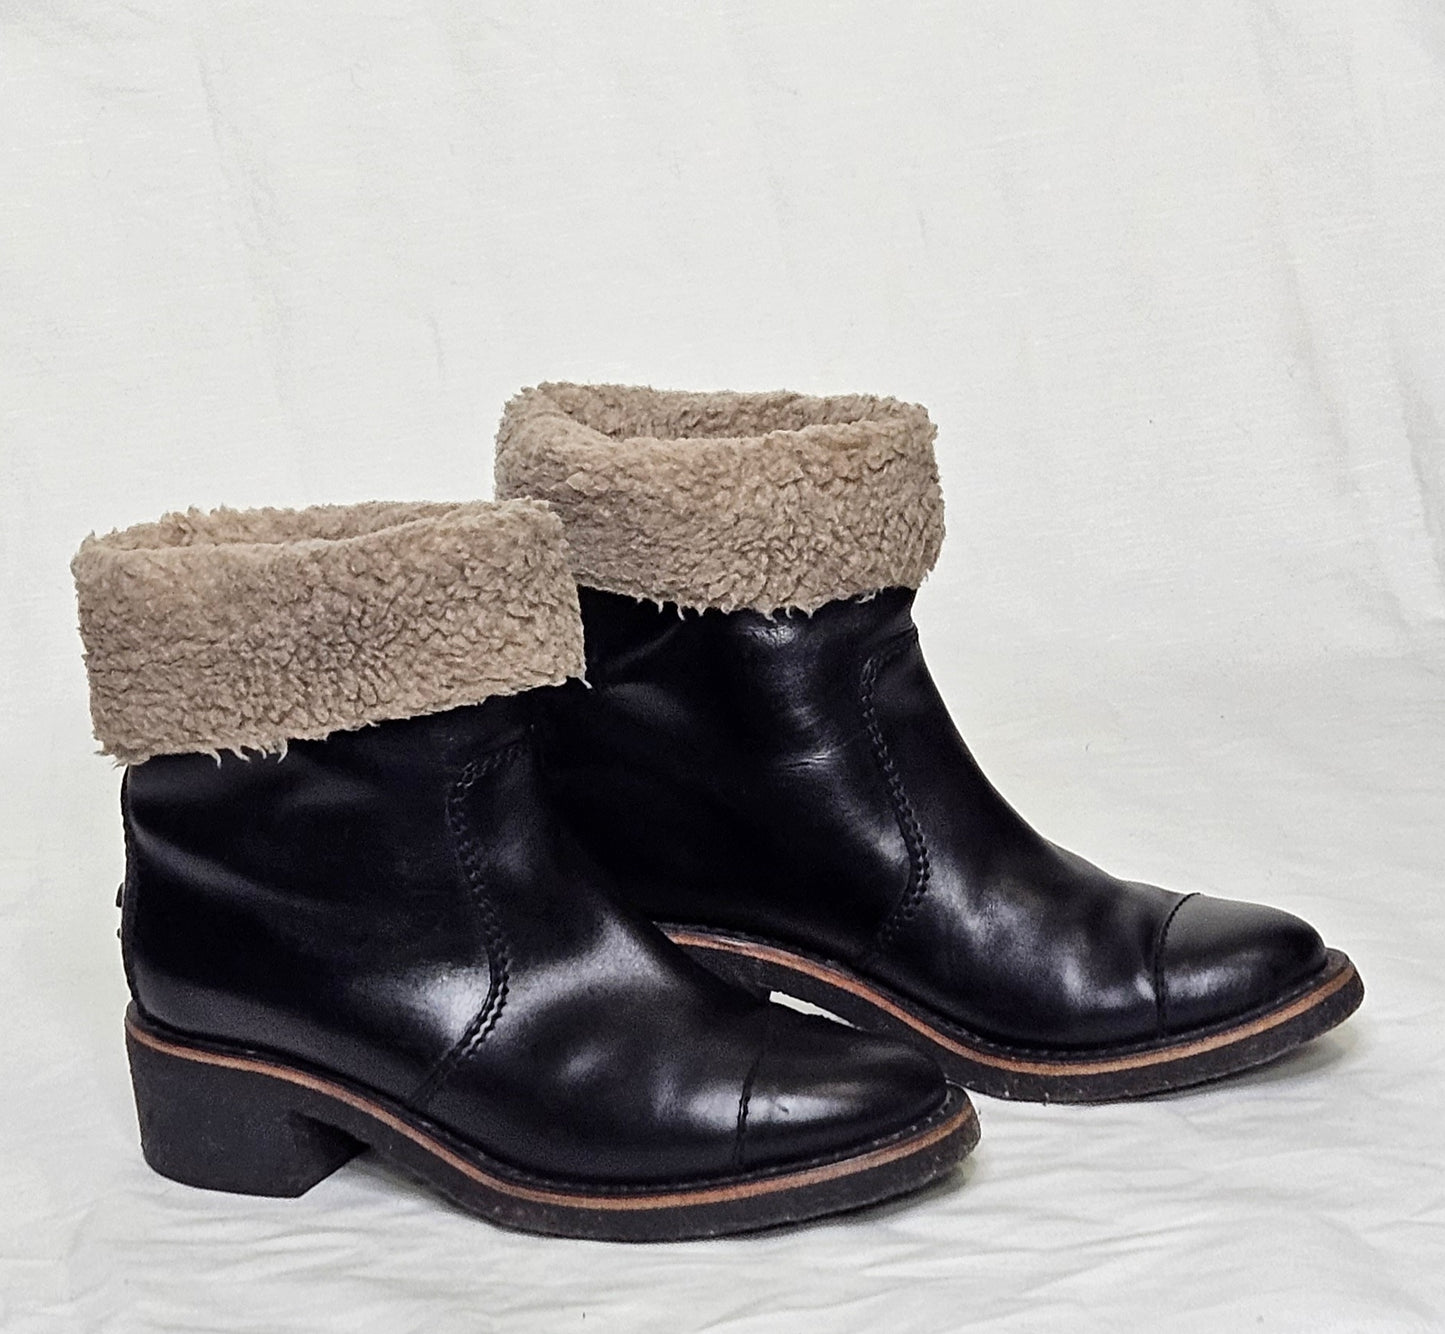 CHANEL Shearling Fold Over Booties